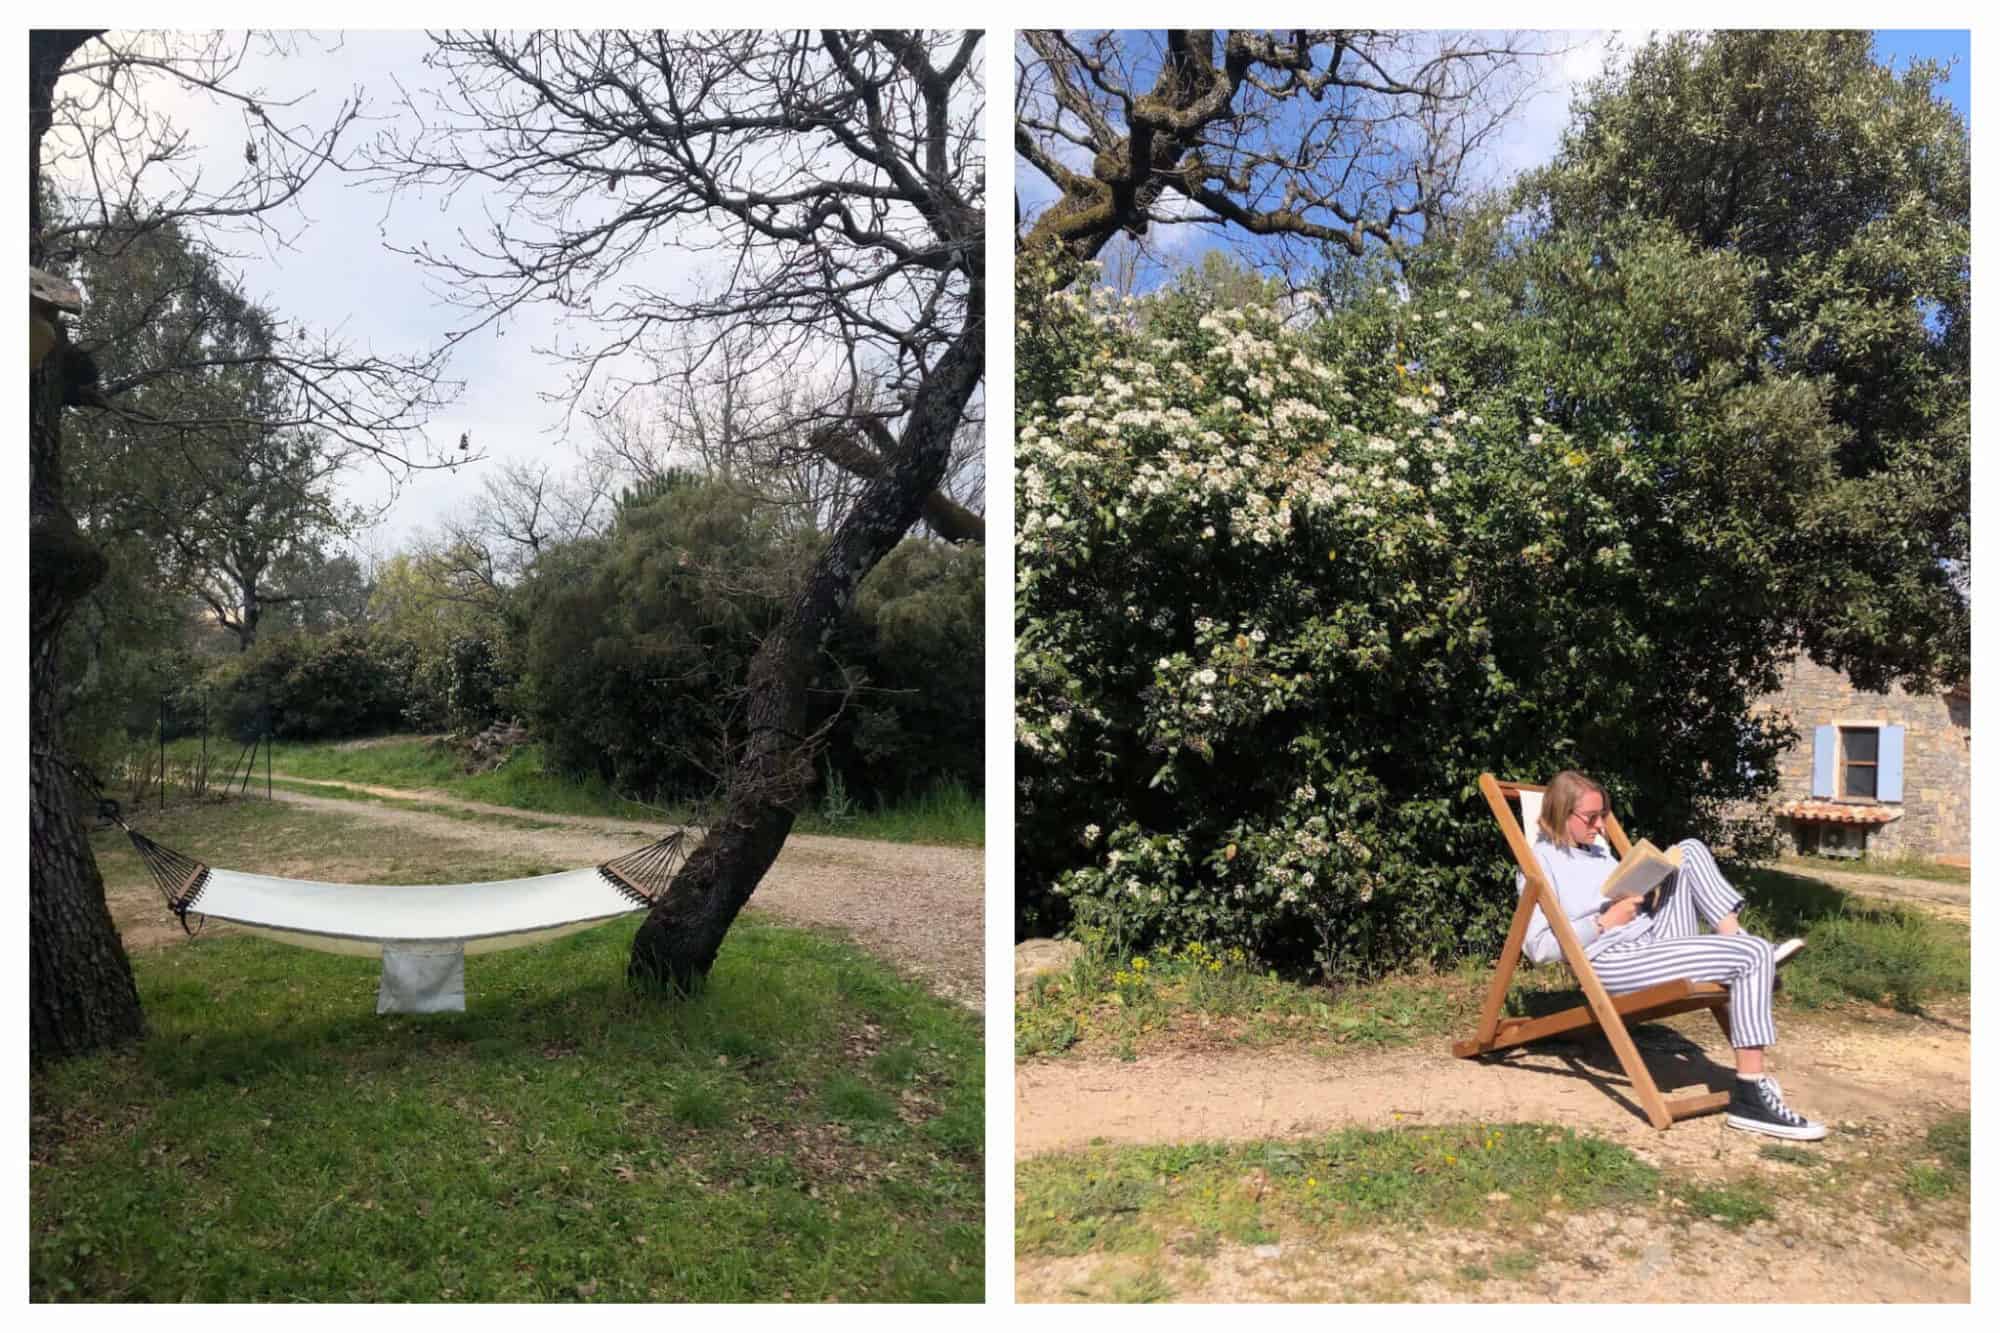 Left: A hammock hangs from two trees in the South of France.
Right: Jamie sits and reads a book on a sunny day in the South of France.